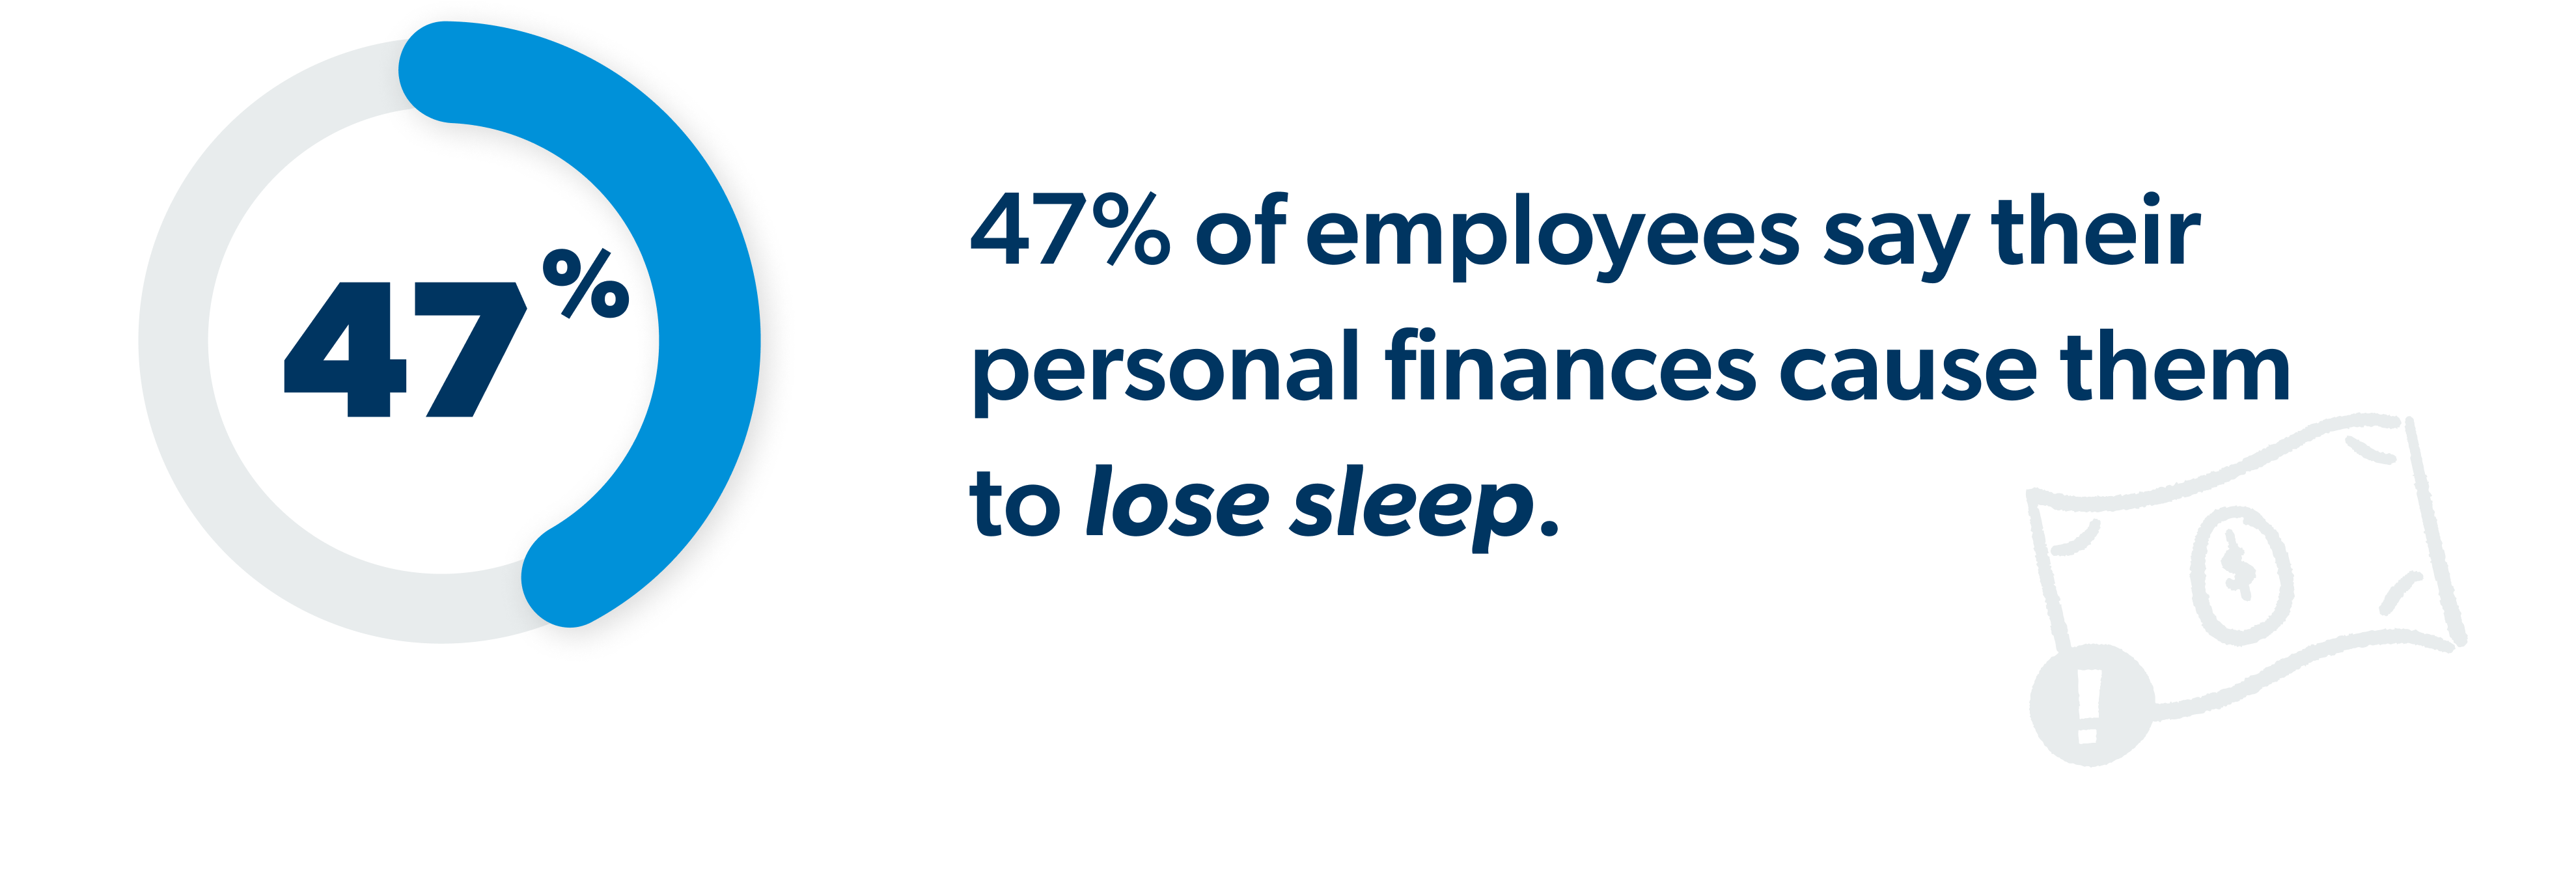 Employees Are Losing Sleep Over Personal Finances